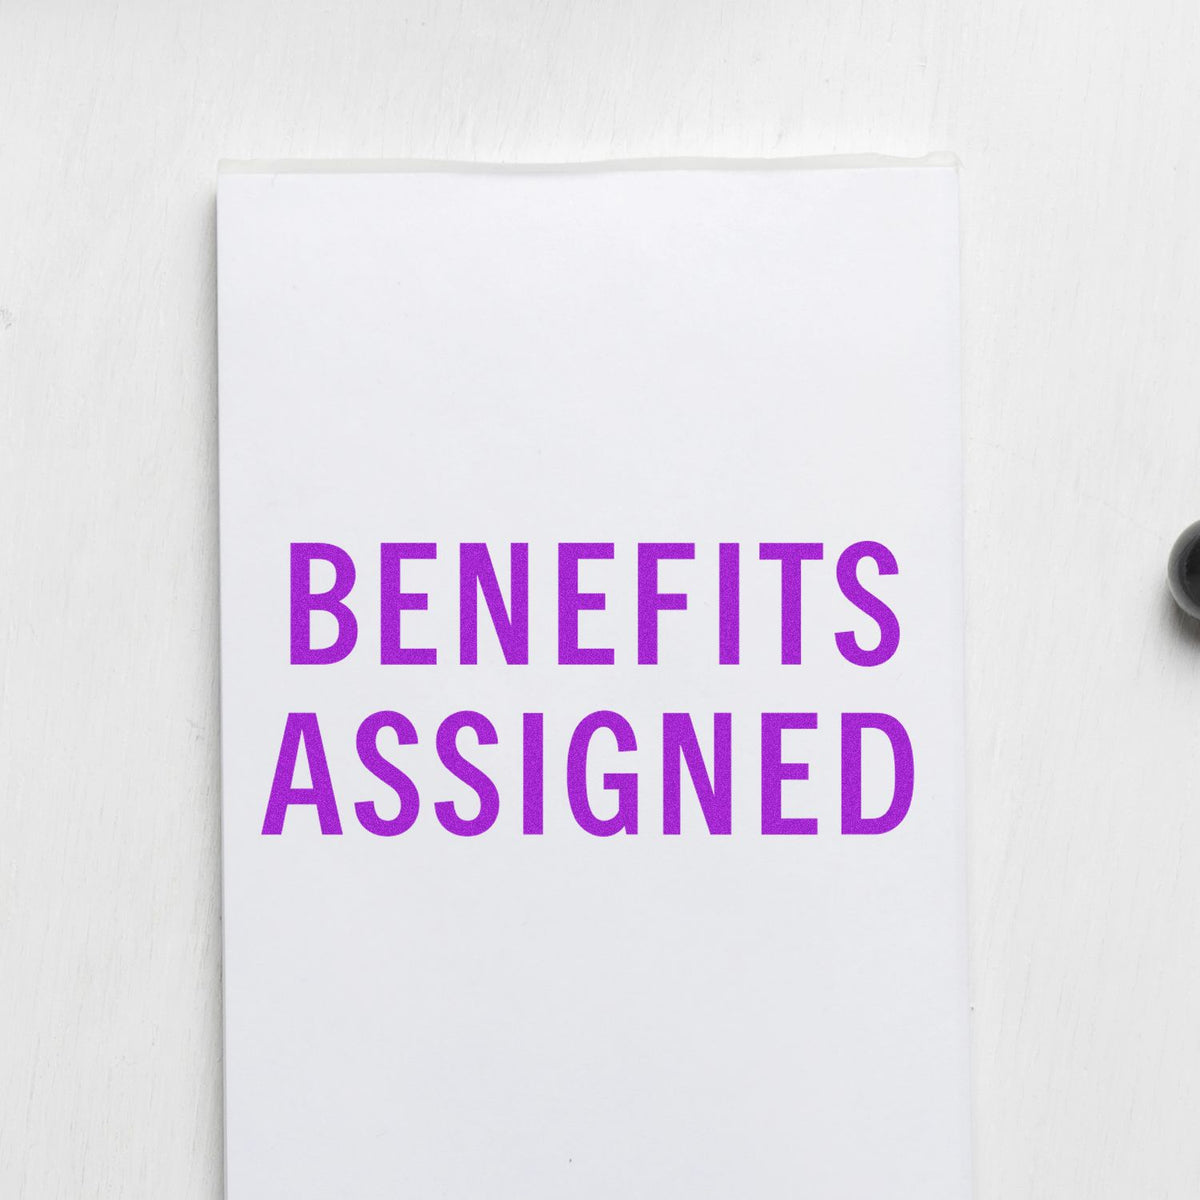 Benefits Assigned Rubber Stamp In Use